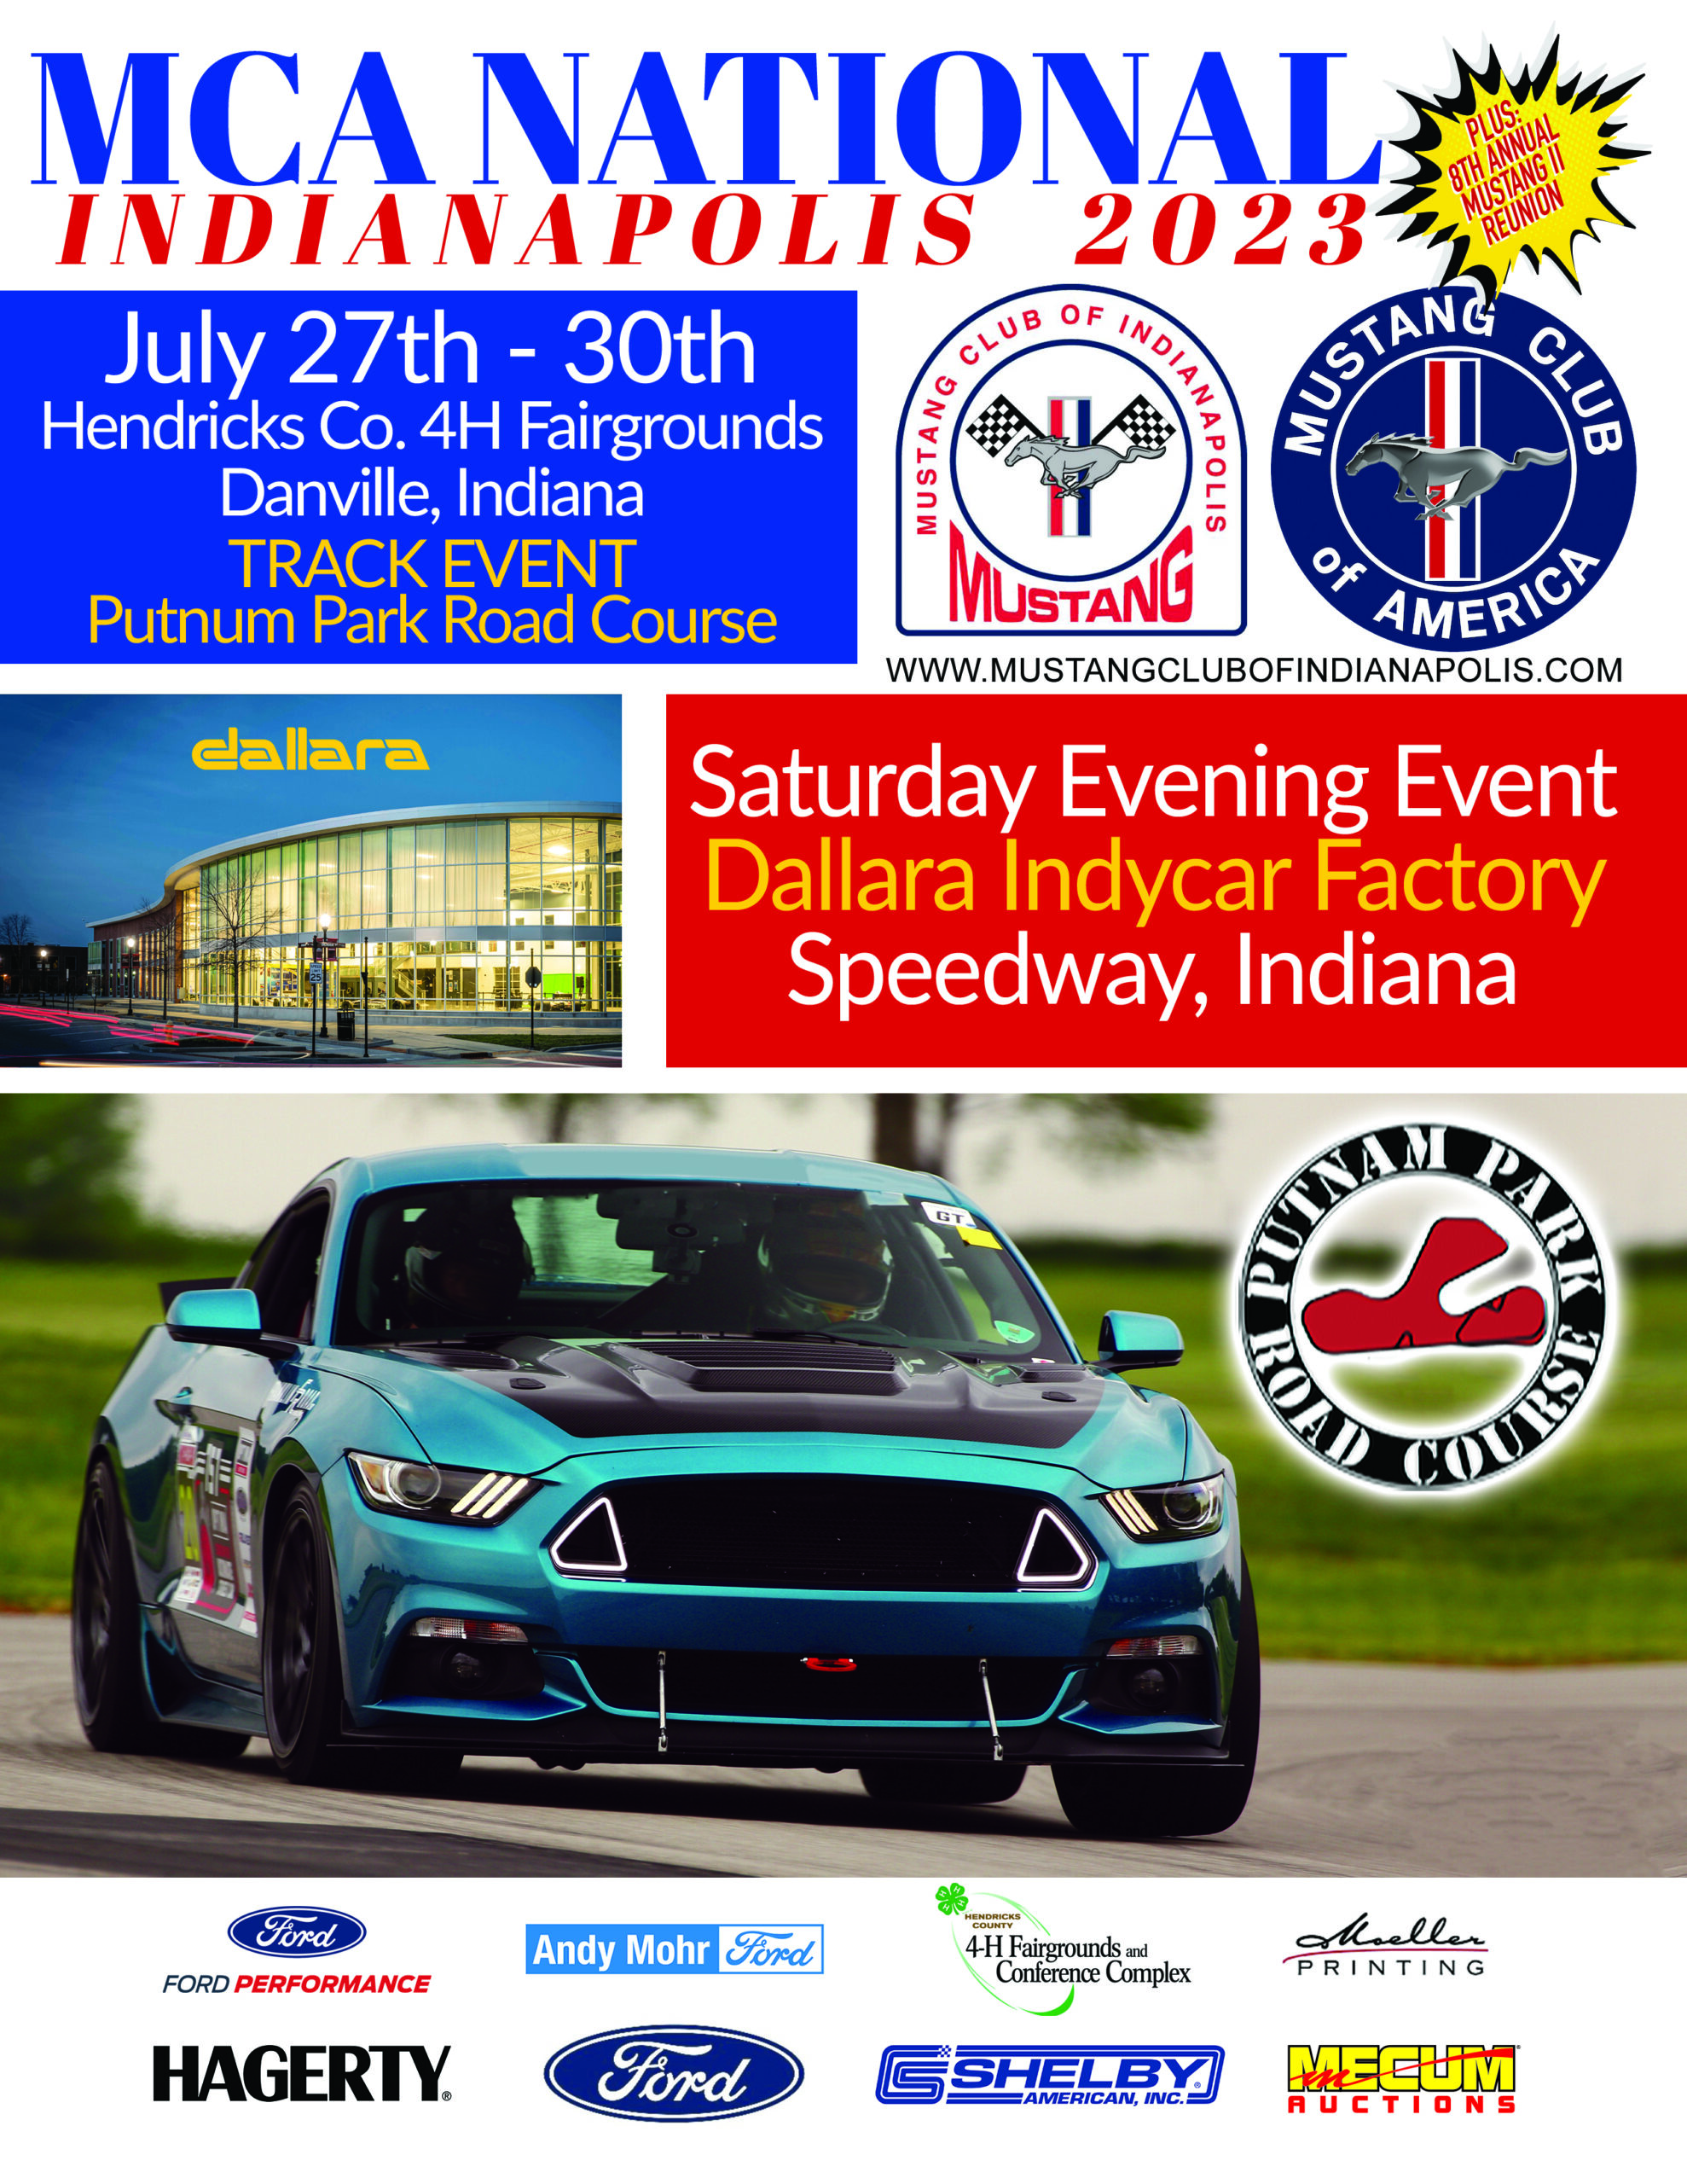 2023 MCA National Car Show Mustang Club of Indianapolis